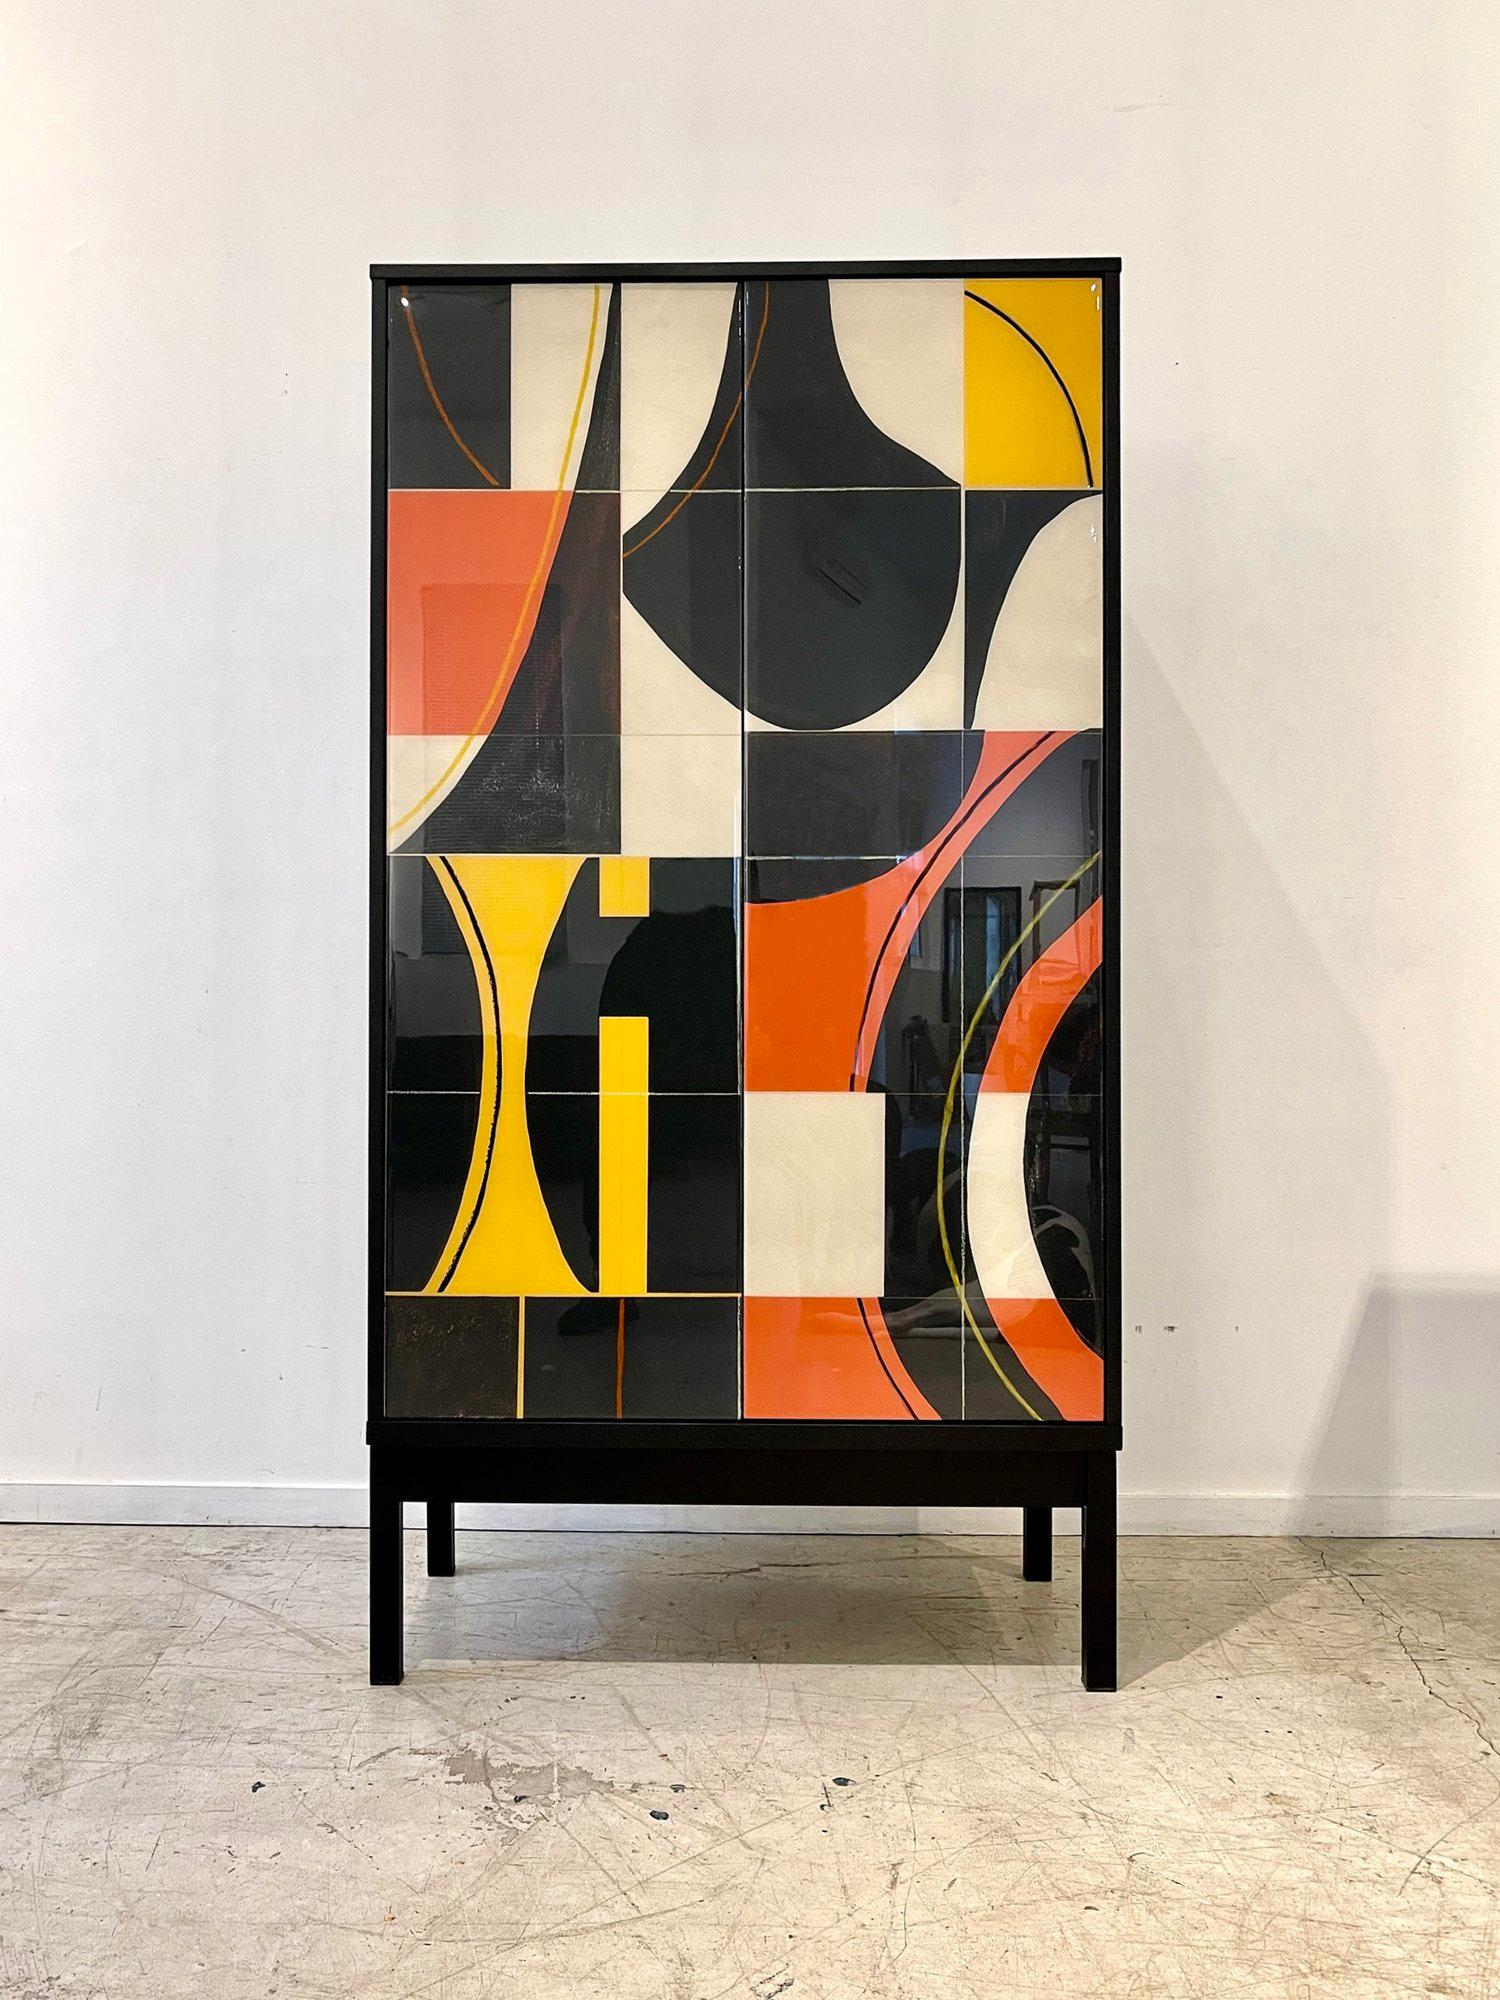 Bossa Armoire by Morgan Clayhall
Dimensions: D 45.72 x W 96.52 x H 182.88 cm
Materials: walnut, mix medium, resin, steel
Also available: Can be customized in size, finish and color.

The Bossa Armoire is painted by hand creating a one of kind